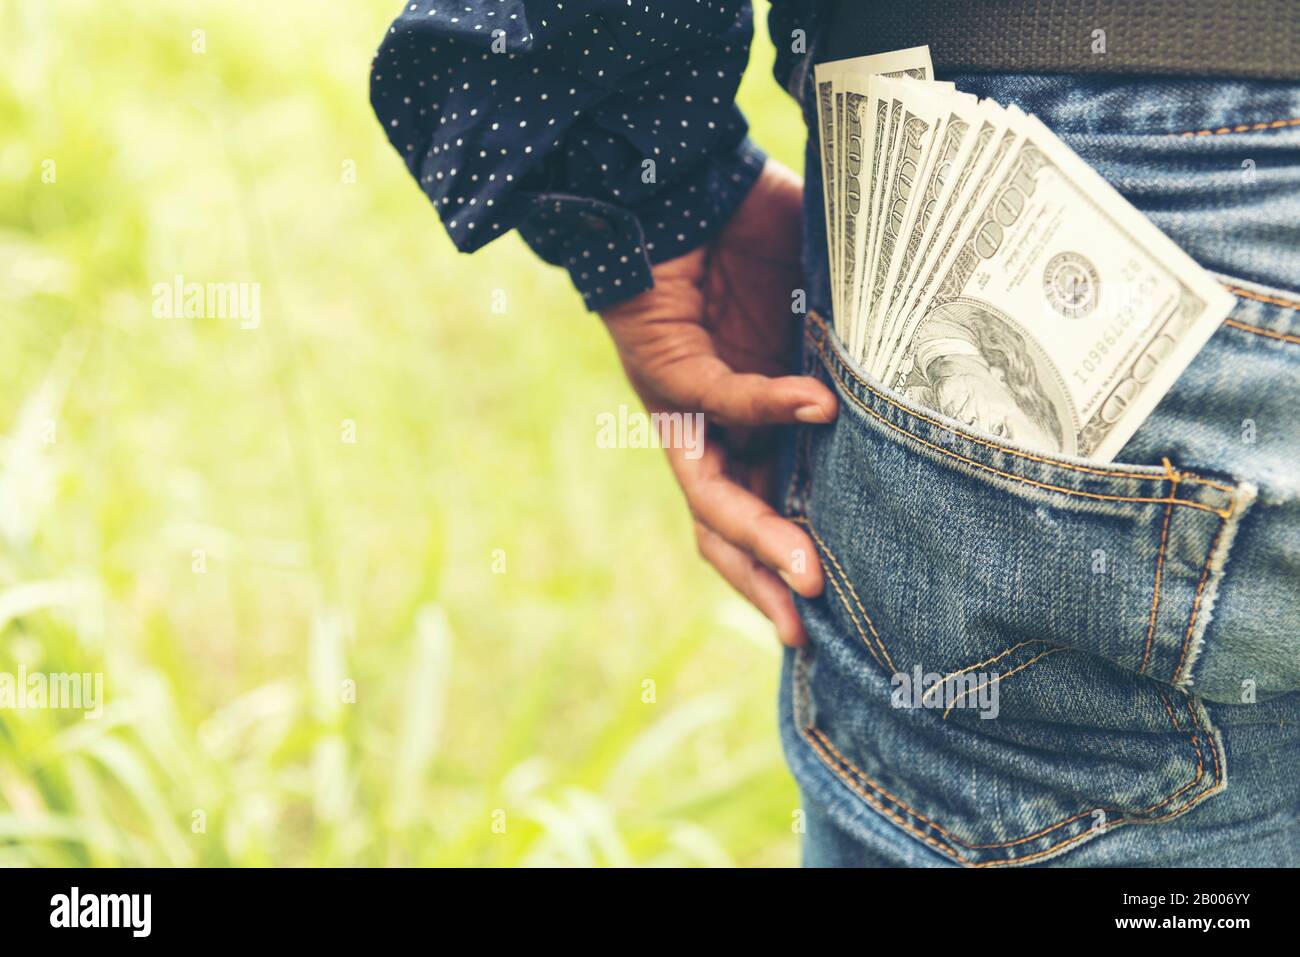 Cutting money lost in Finance Problems man with dollar bank note money in back pocket. financial concept. Stock Photo